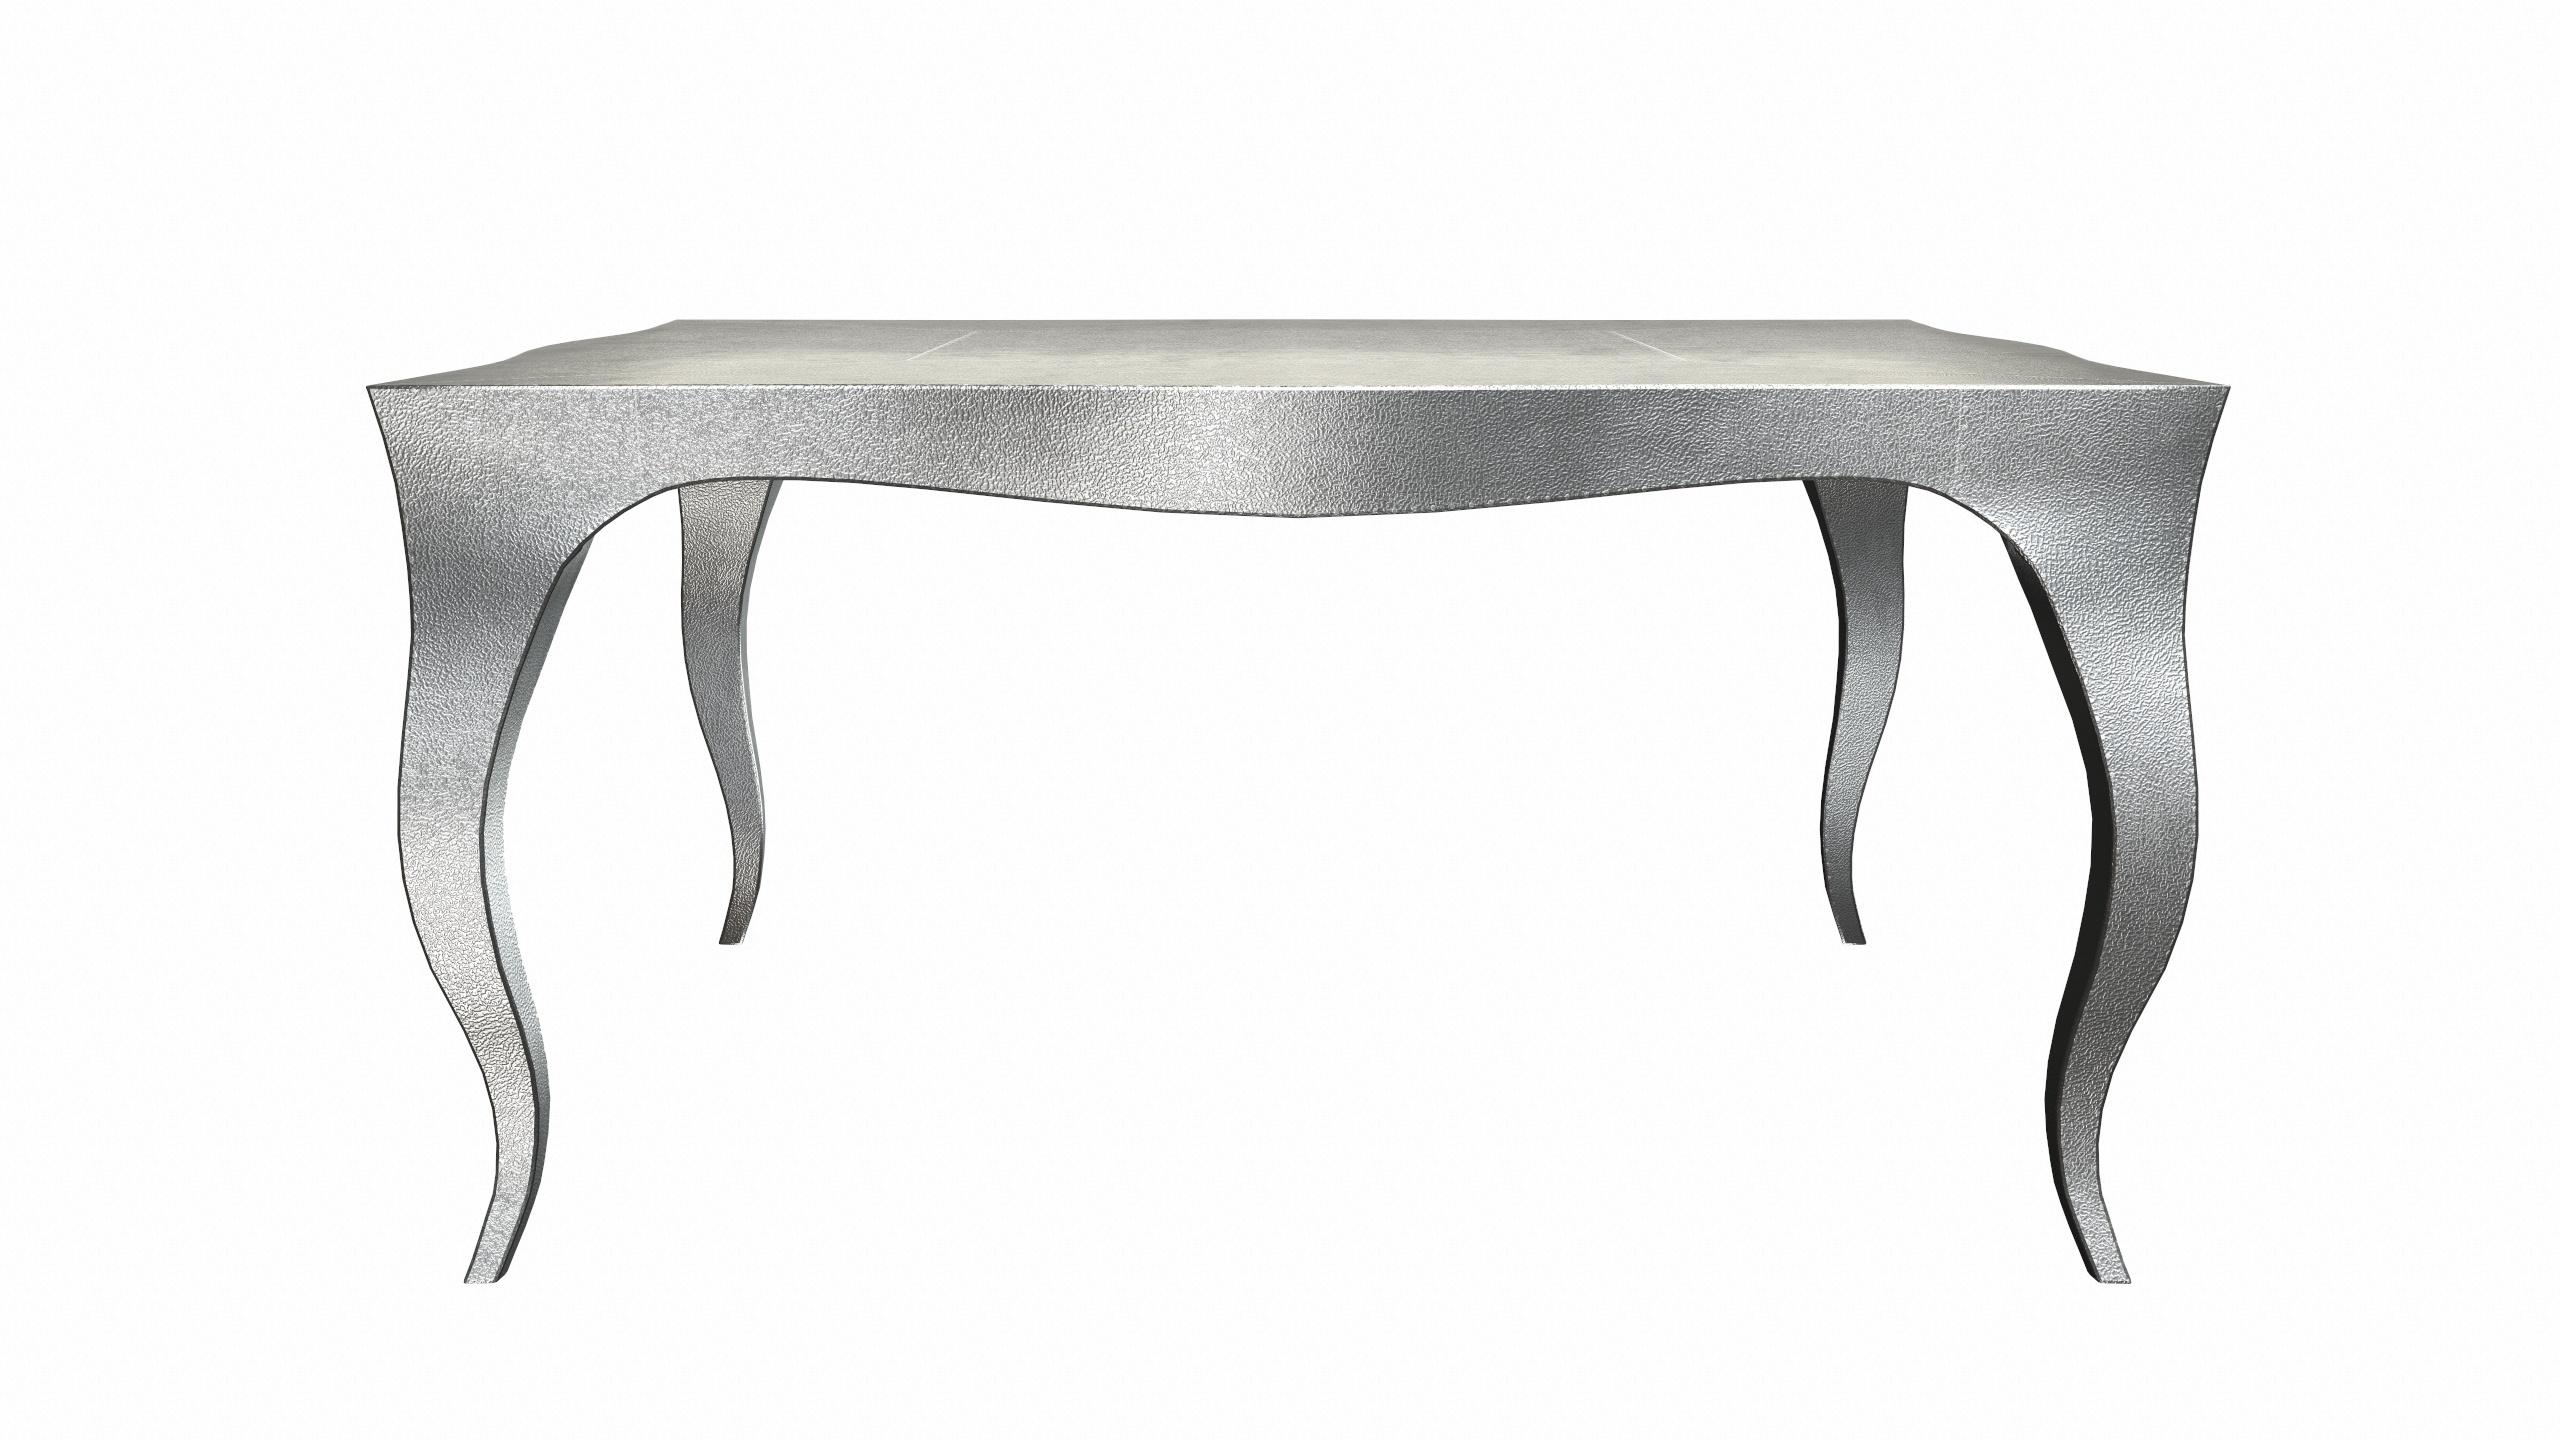 American Louise Art Deco Industrial and Work Tables Fine Hammered White Bronze by Paul M. For Sale